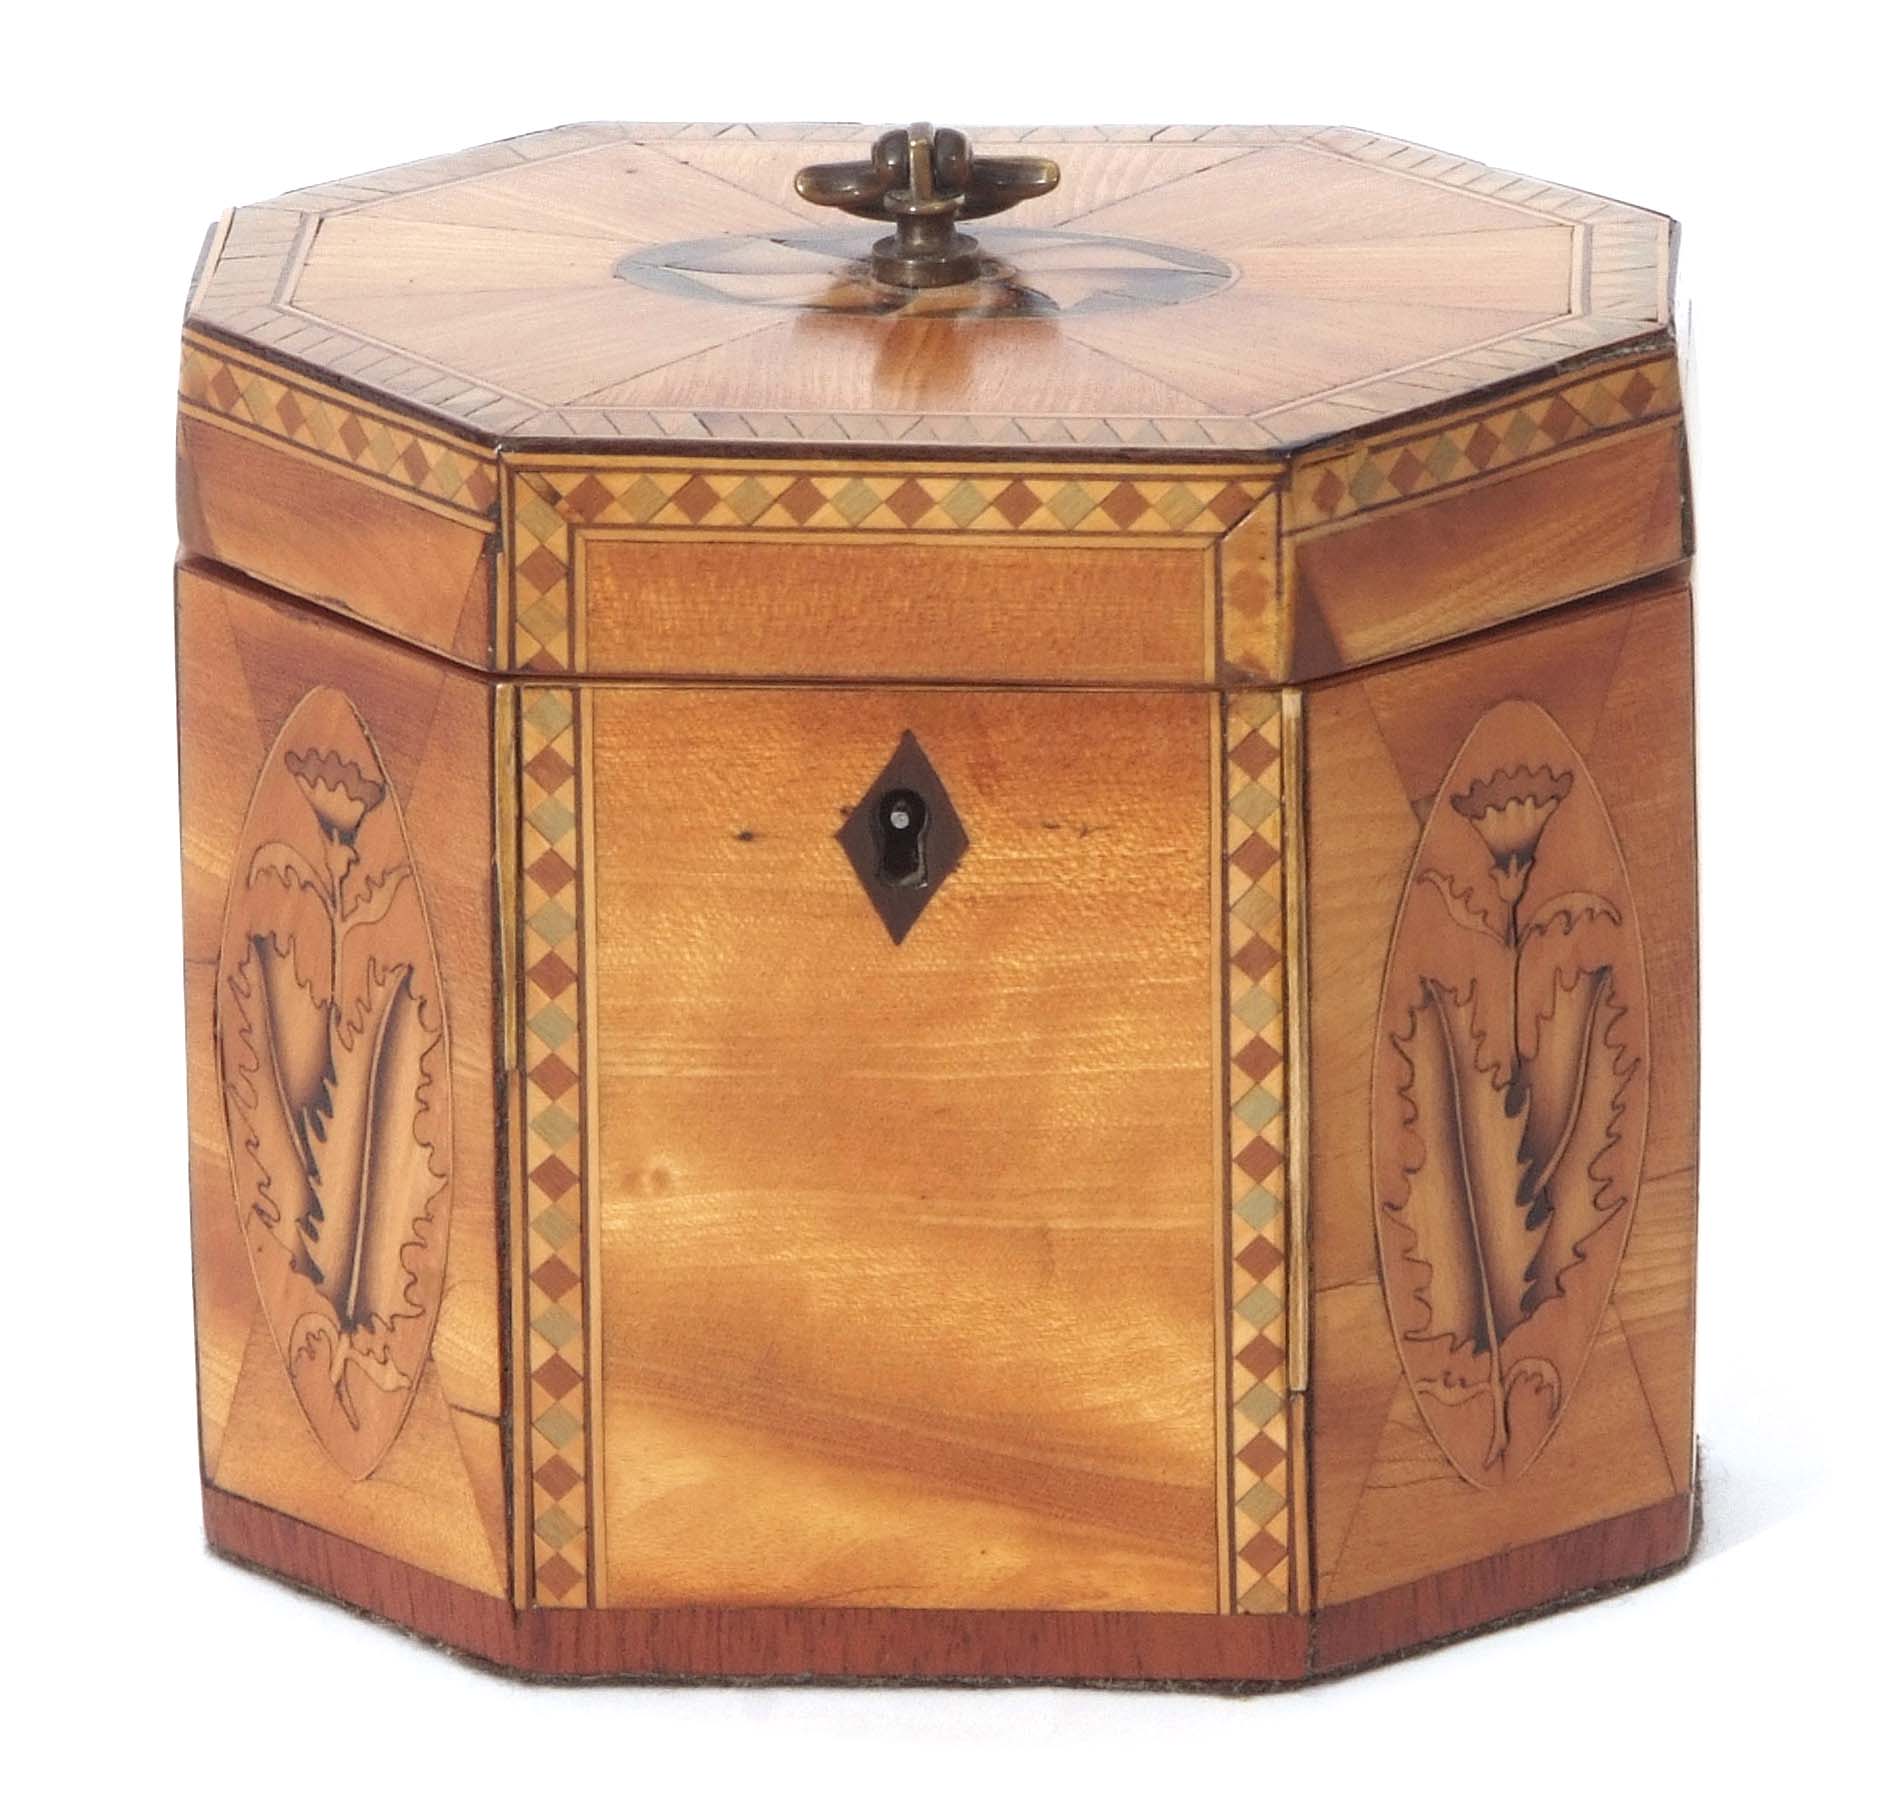 Sheraton style satinwood tea caddy of octagonal form, the interior with single compartment, inlaid